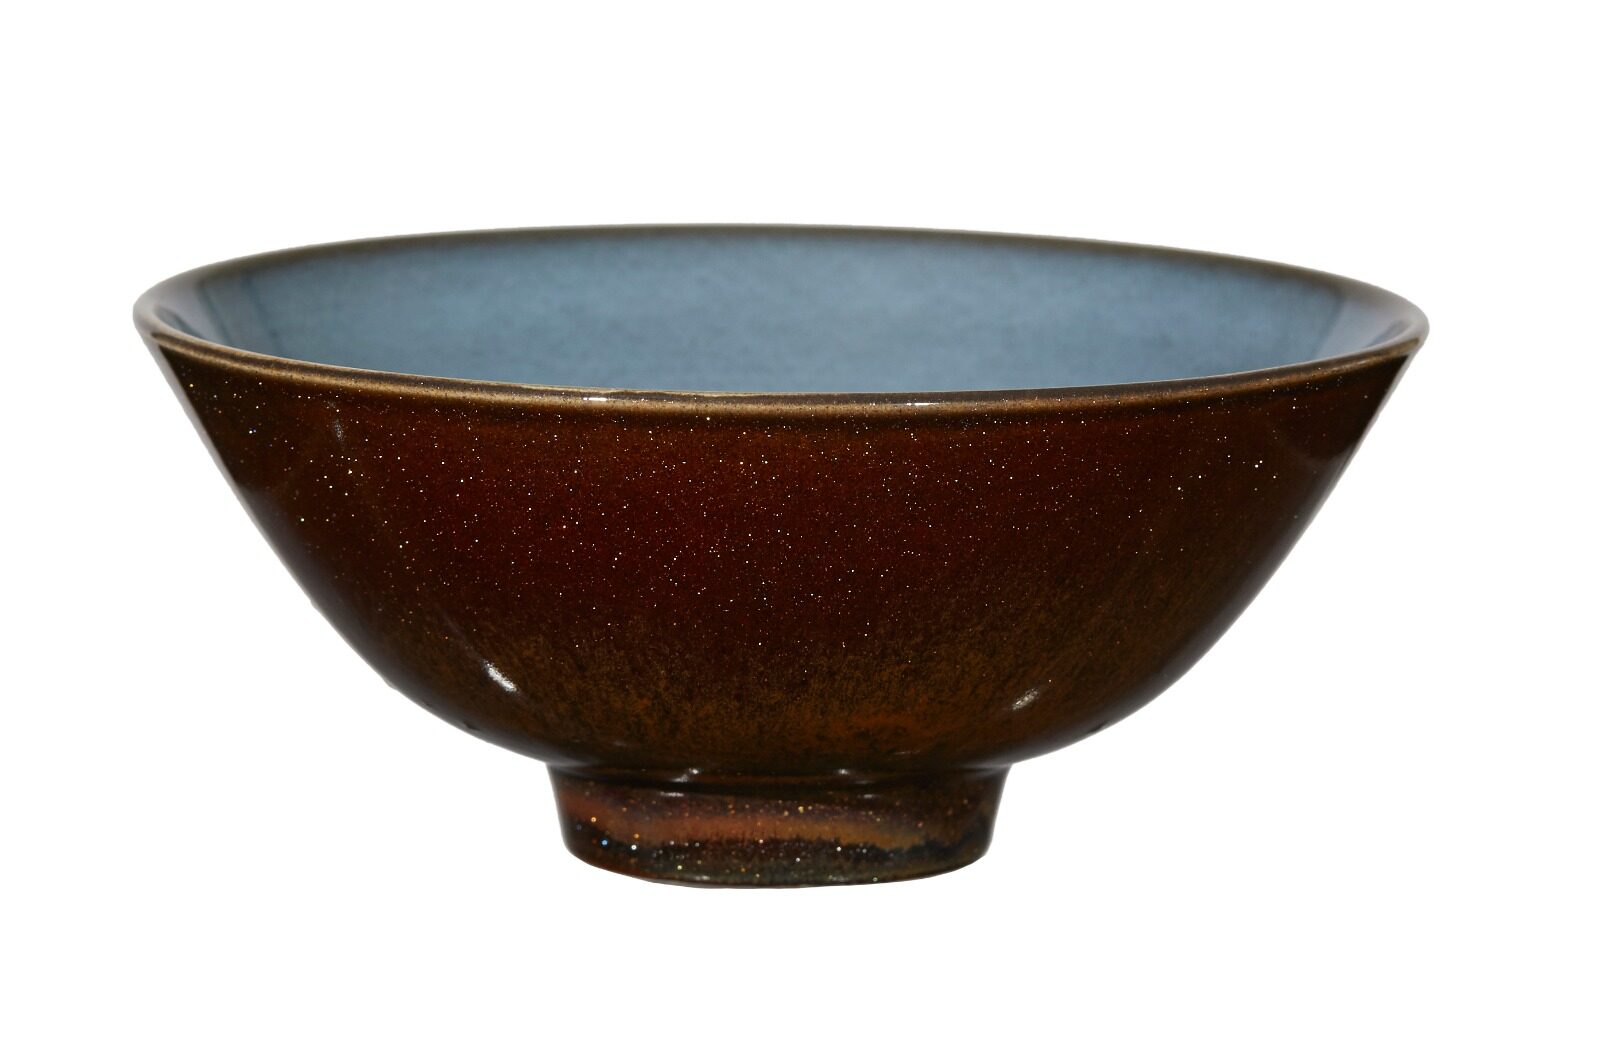 wedgwood, norman wilson bowl, aventurine glaze, turquoise and speckled brown. Each piece is unique, a one off.